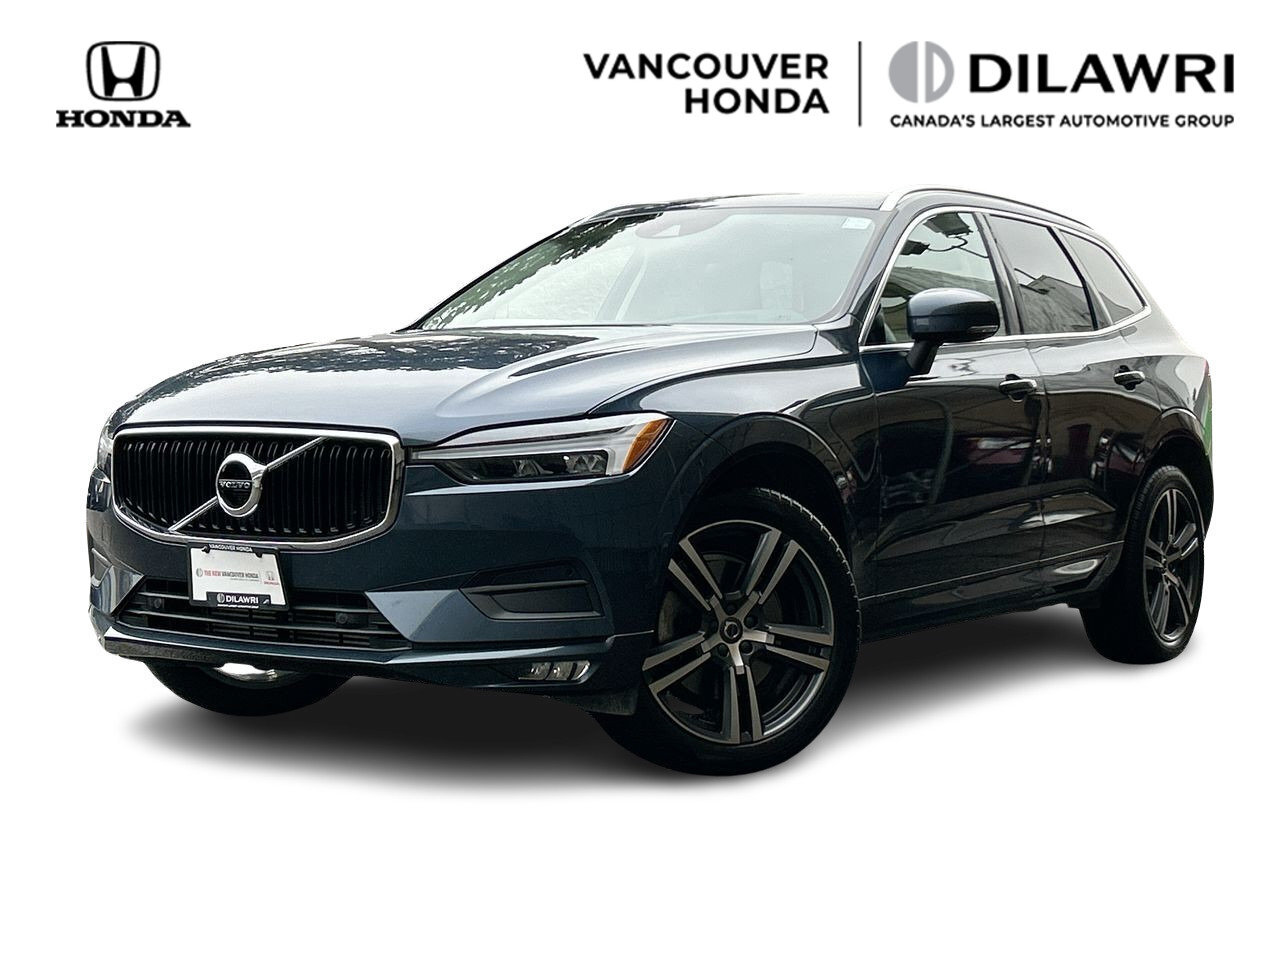 2021 Volvo XC60 Momentum | Dilawri Pre-Owned Event ON Now! | / | A